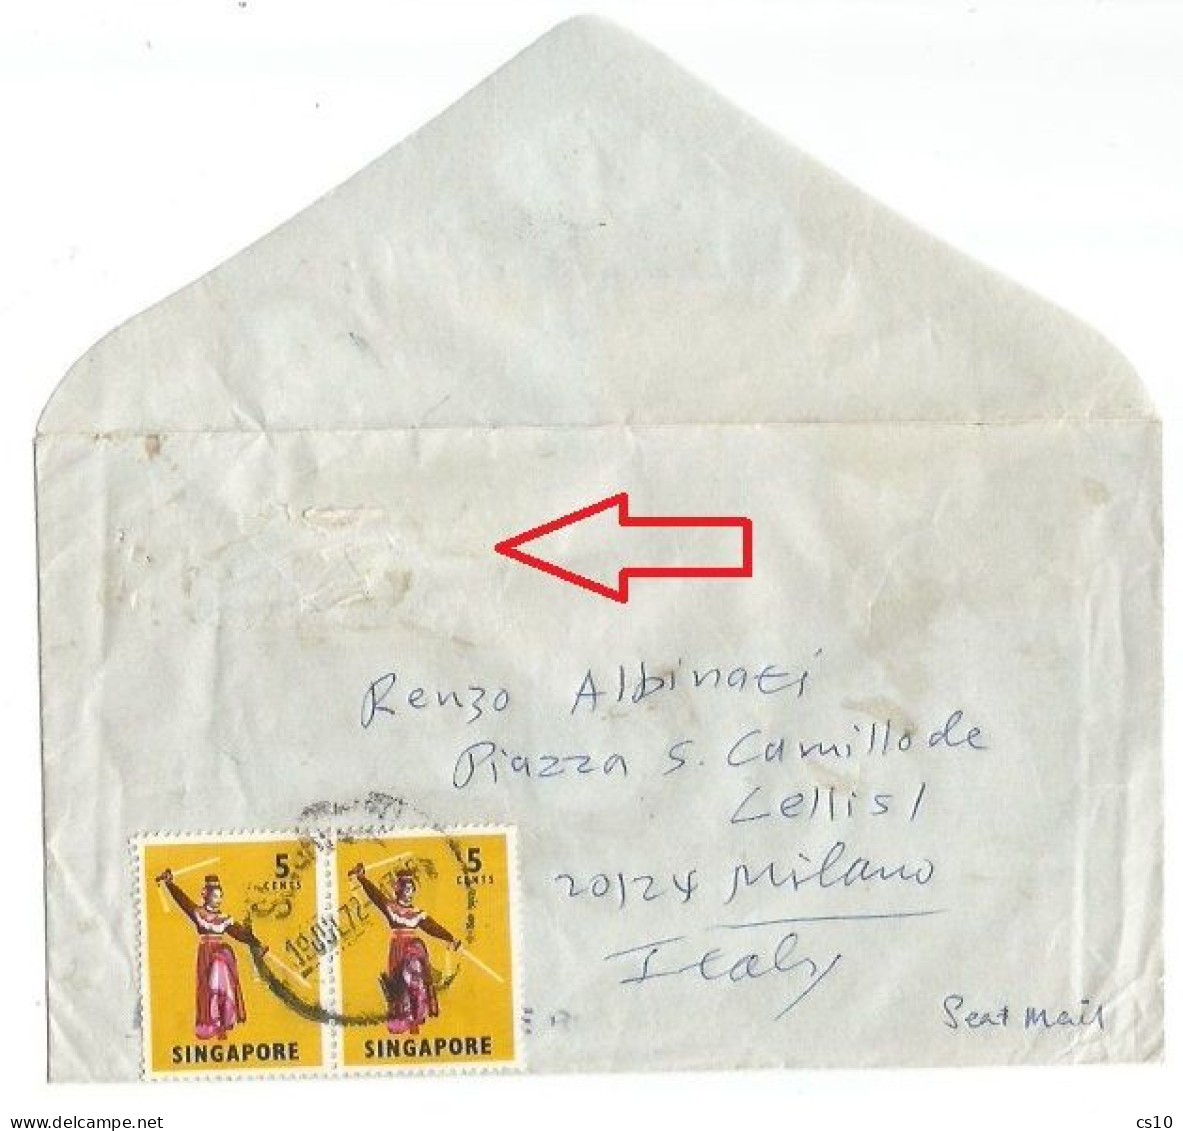 Singapore AirMail Cover  DOWNGRADED At SEA Mail Handwritten (Airm Label Removed) 19jul1972 X Italy With Dancers C.5x2 - Singapur (...-1959)